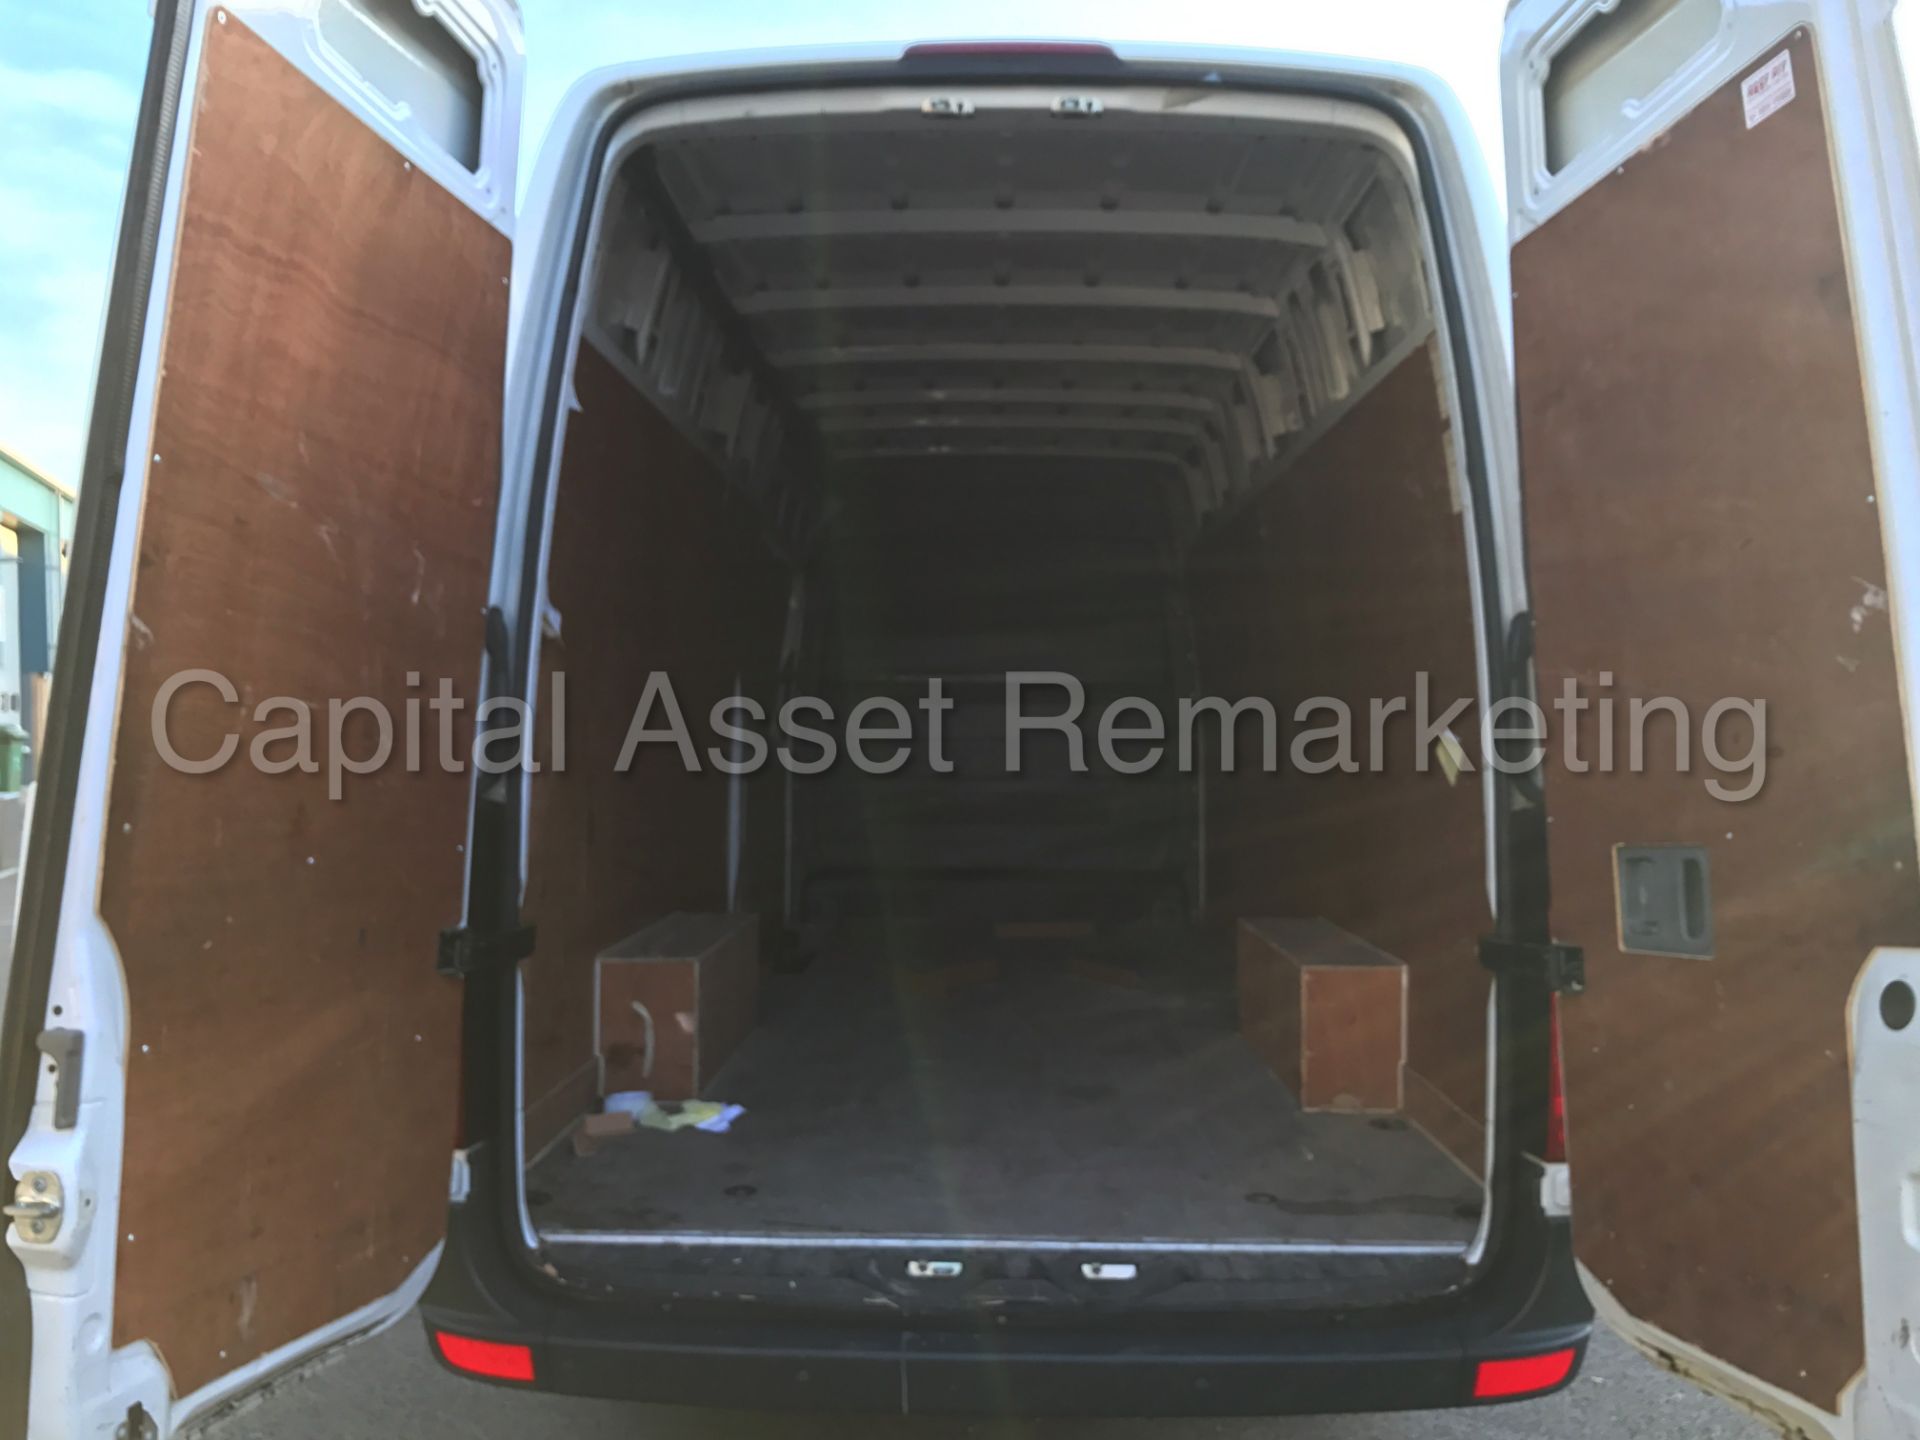 VOLKSWAGEN CRAFTER CR35 'LWB HI-ROOF' (2015 MODEL) '2.0 TDI - 163 PS - 6 SPEED' (1 COMPANY OWNER) - Image 12 of 23